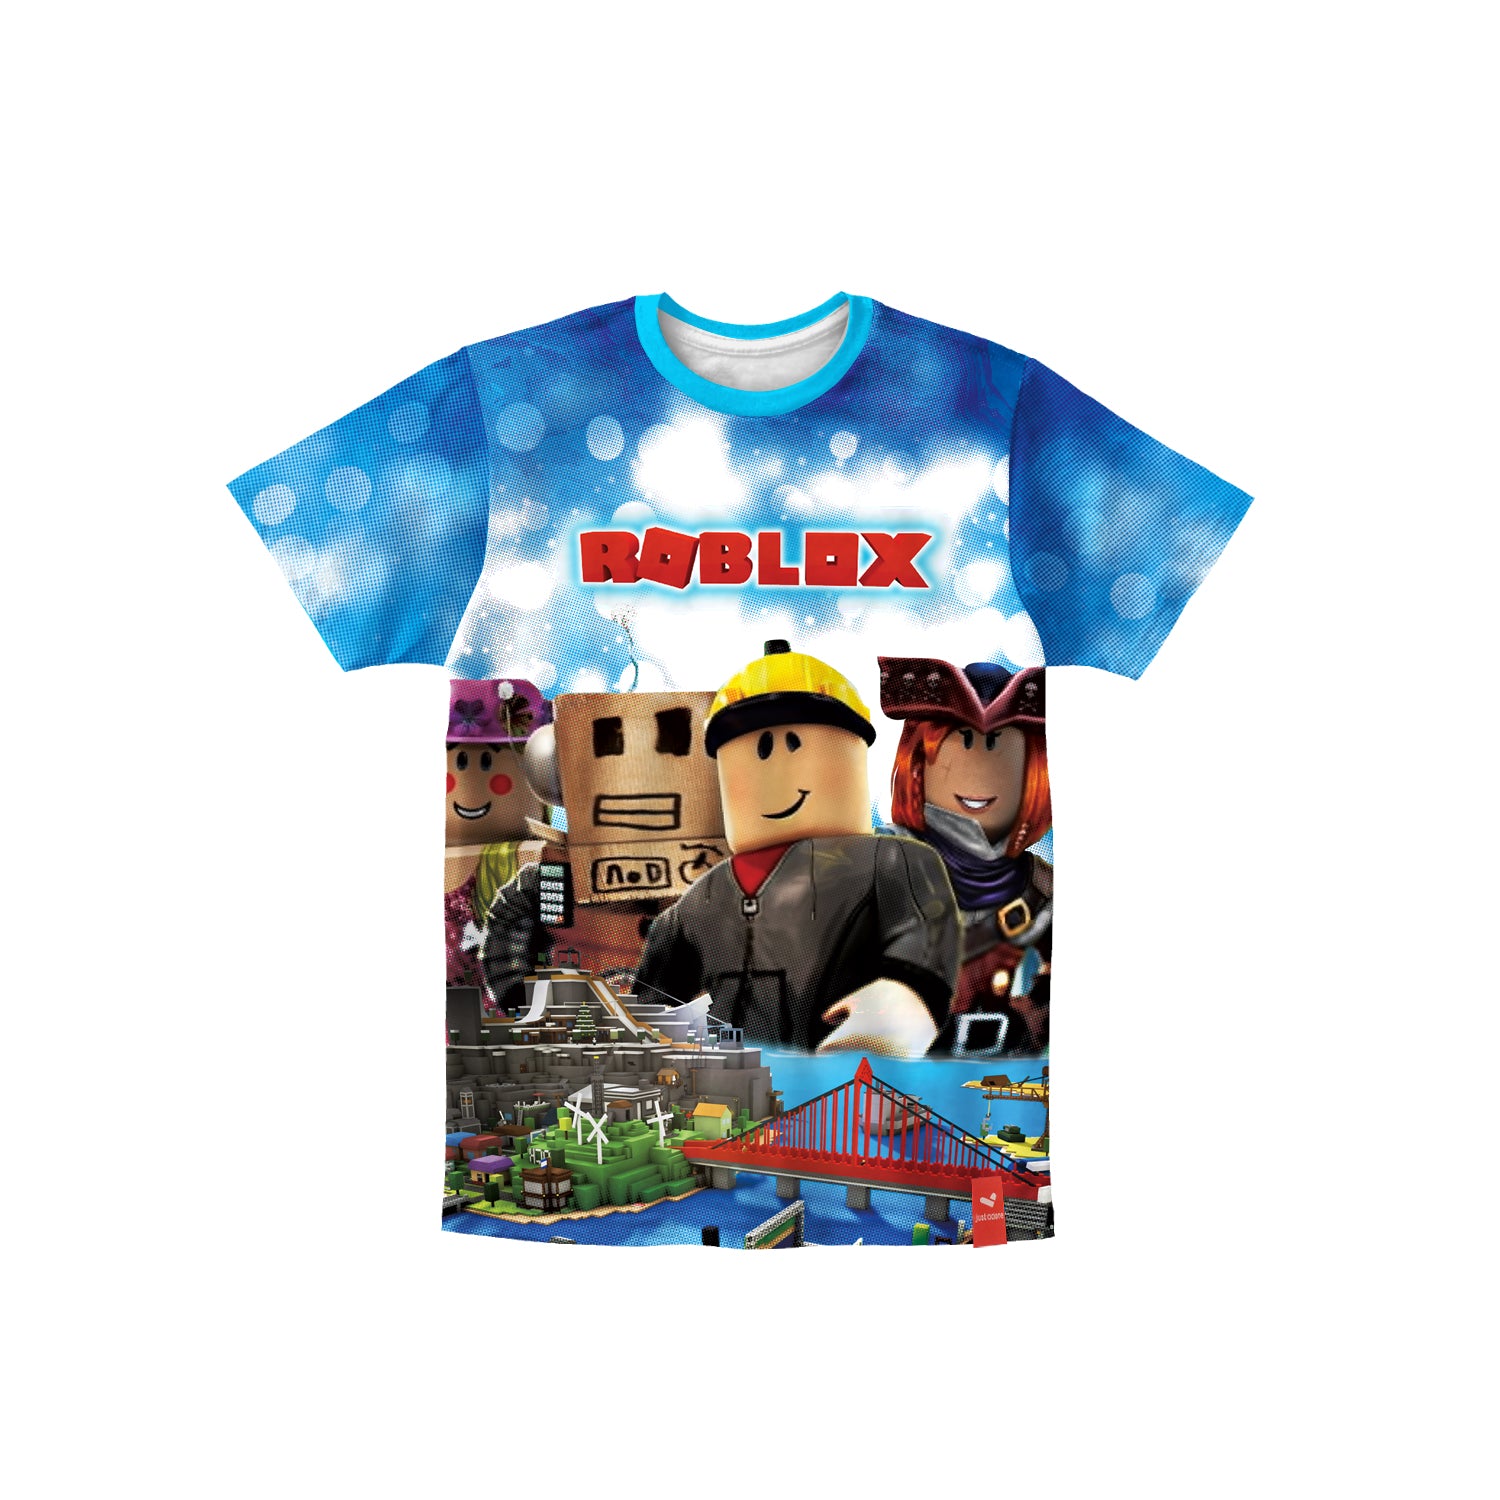 Ay Cabron™ Roblox Online Videogame  Roblox Kid Video Gamer Cotton T-Shirt  For Men (XS, NAVY BLUE): Buy Online at Best Price in UAE 